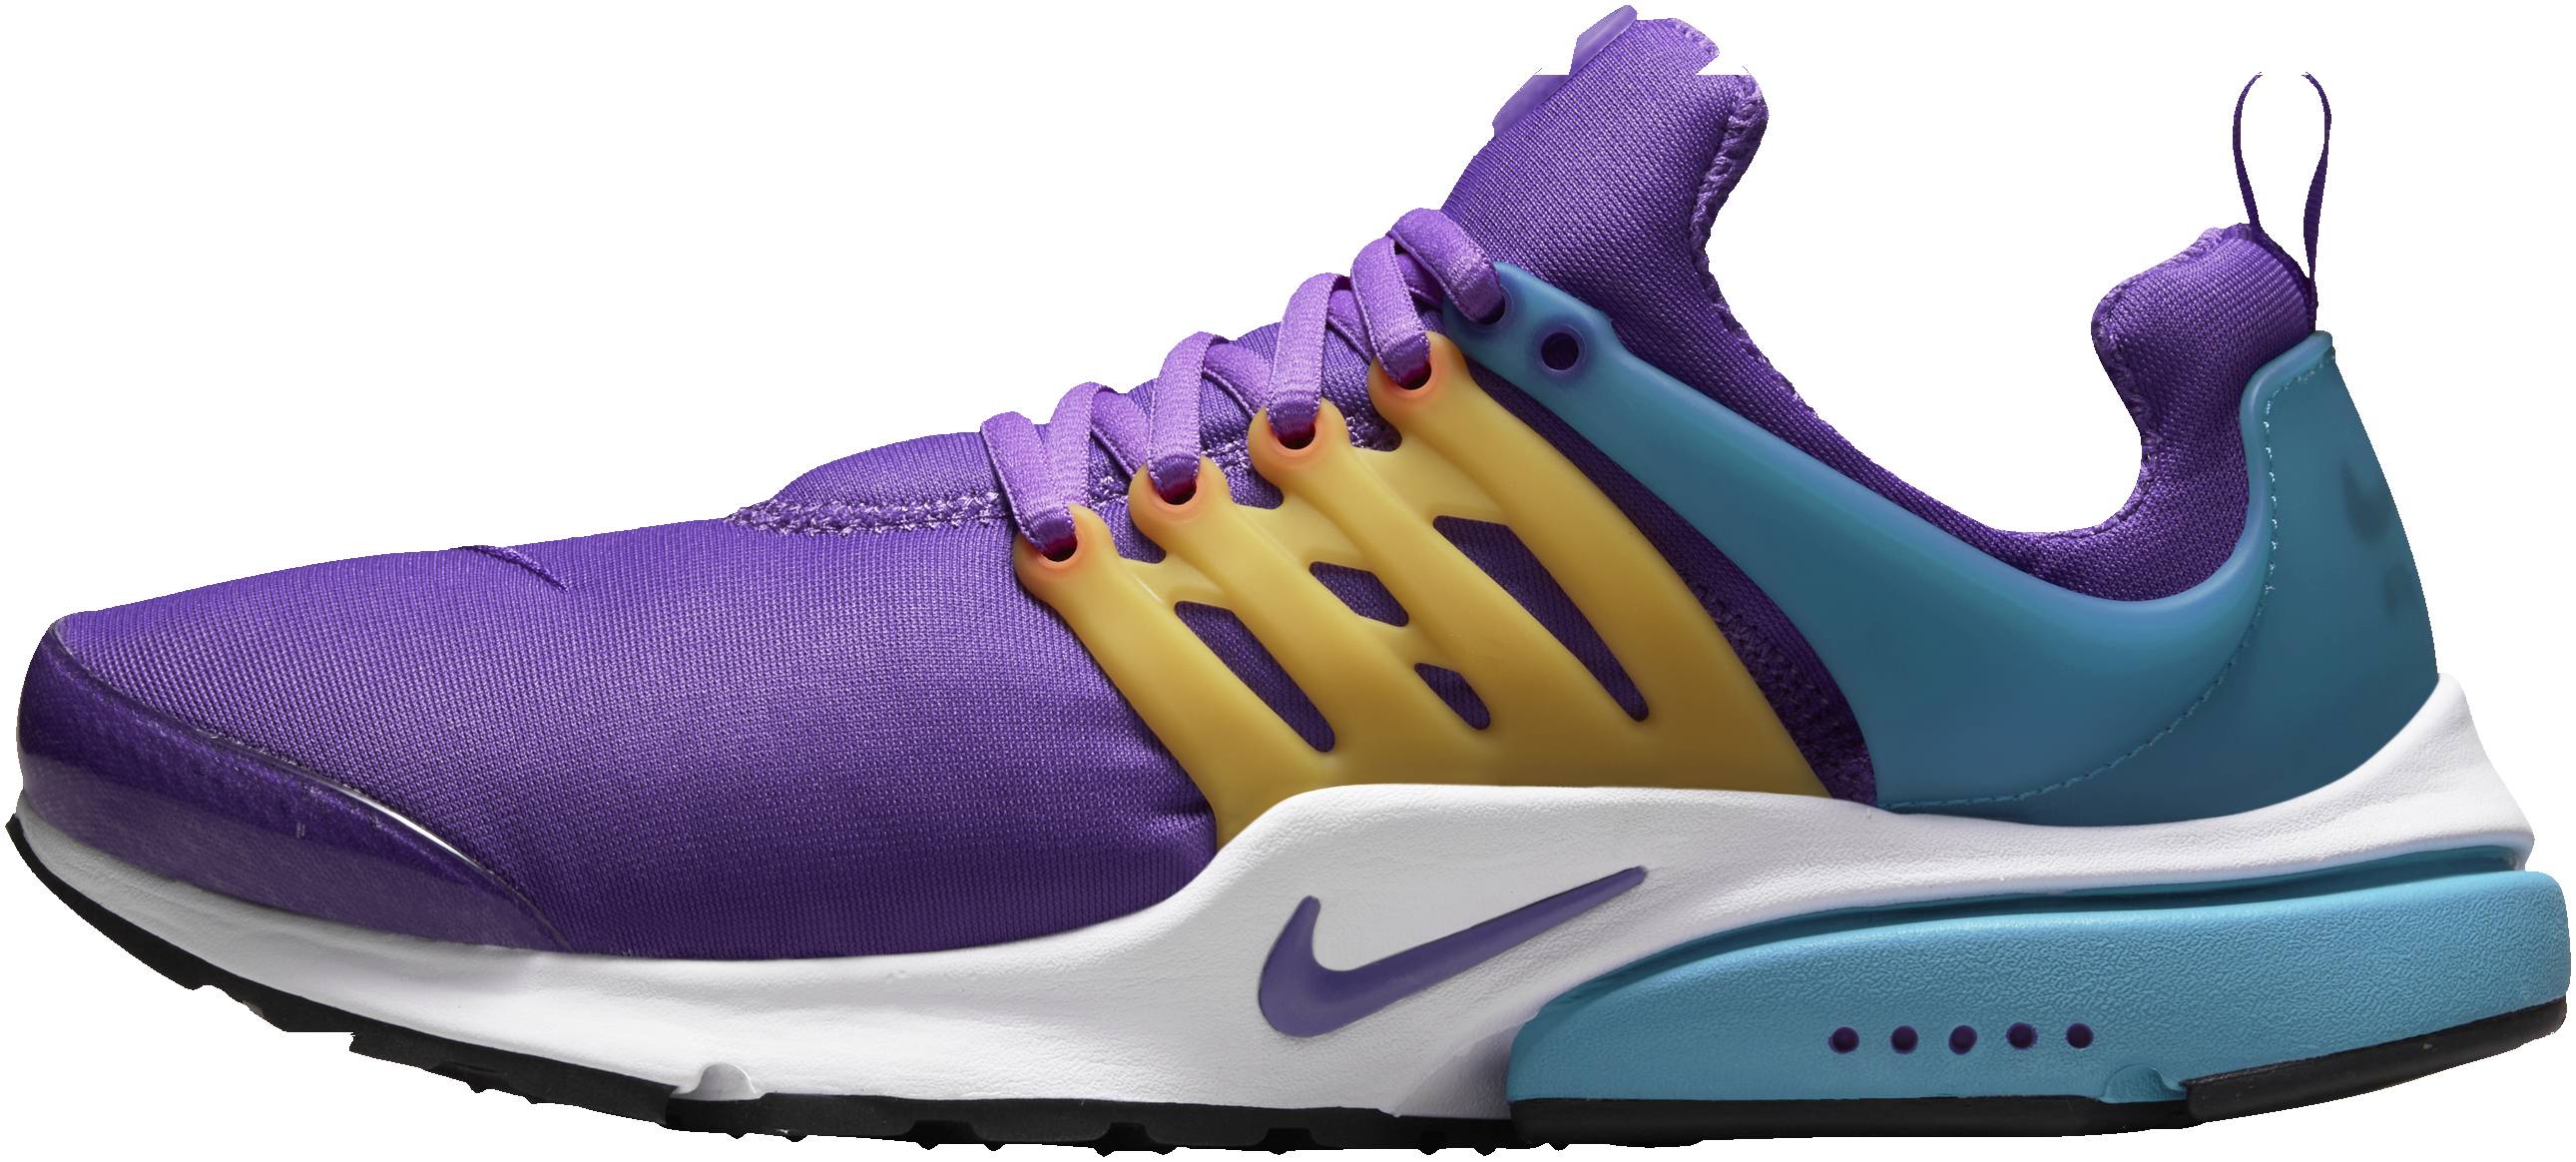 purple and teal nikes